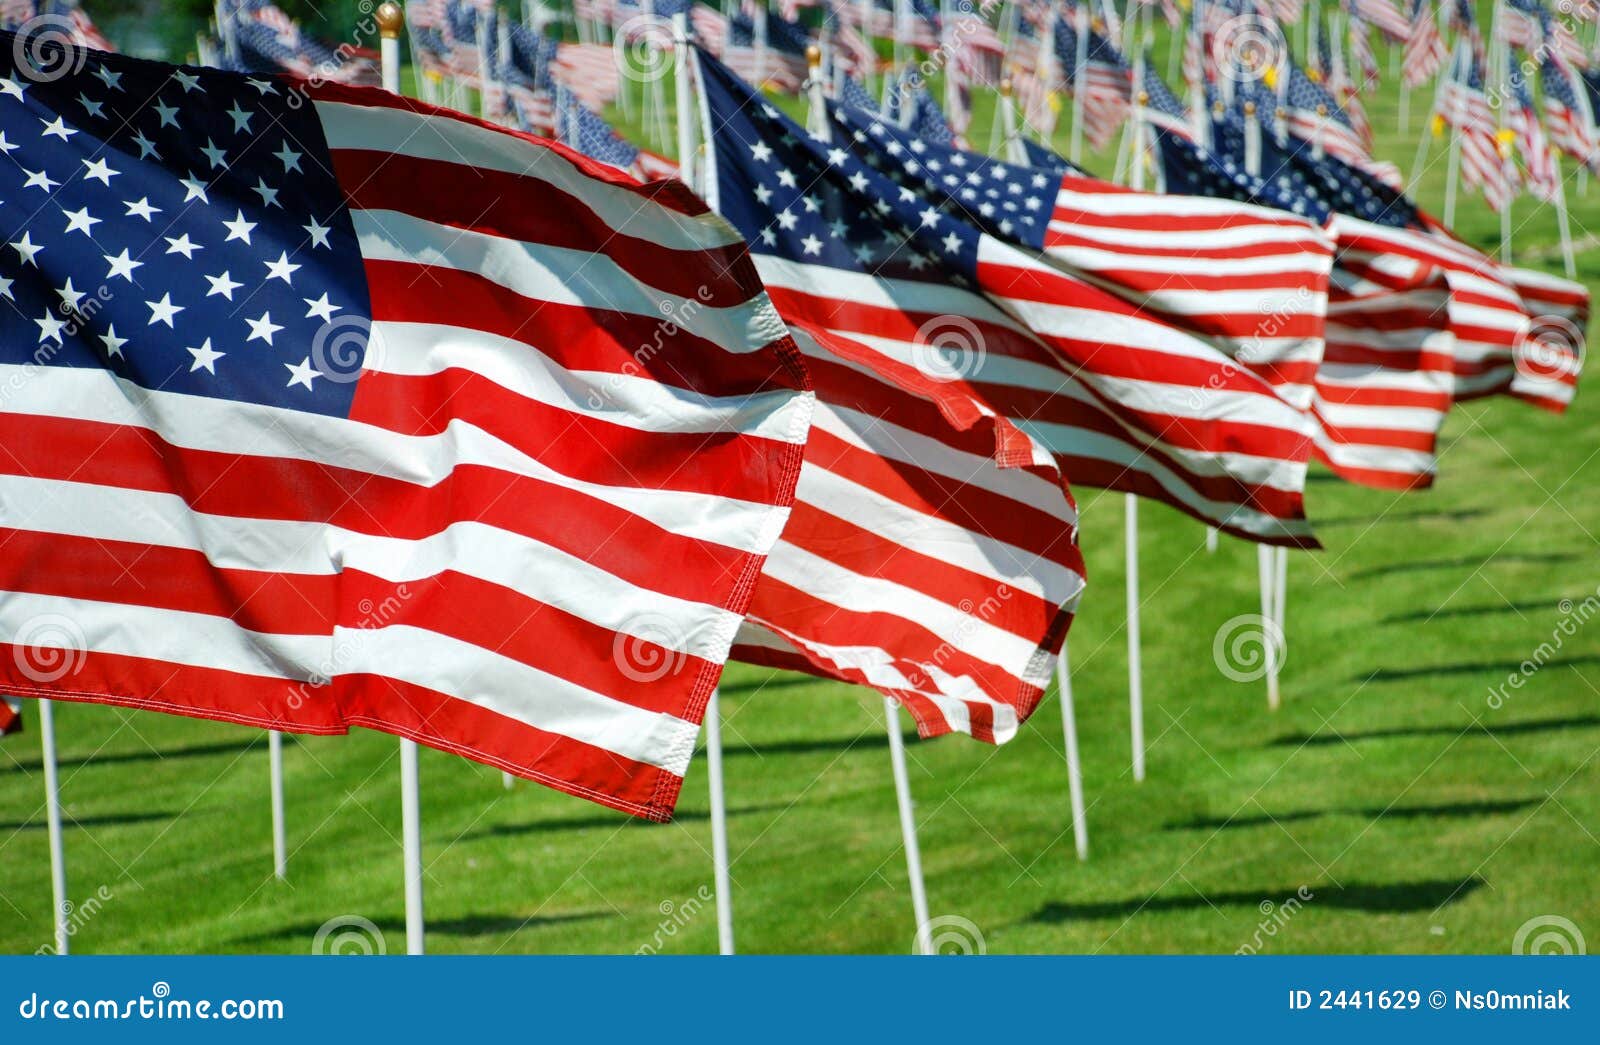 Us Flags Royalty Free Stock Images Image 2441629